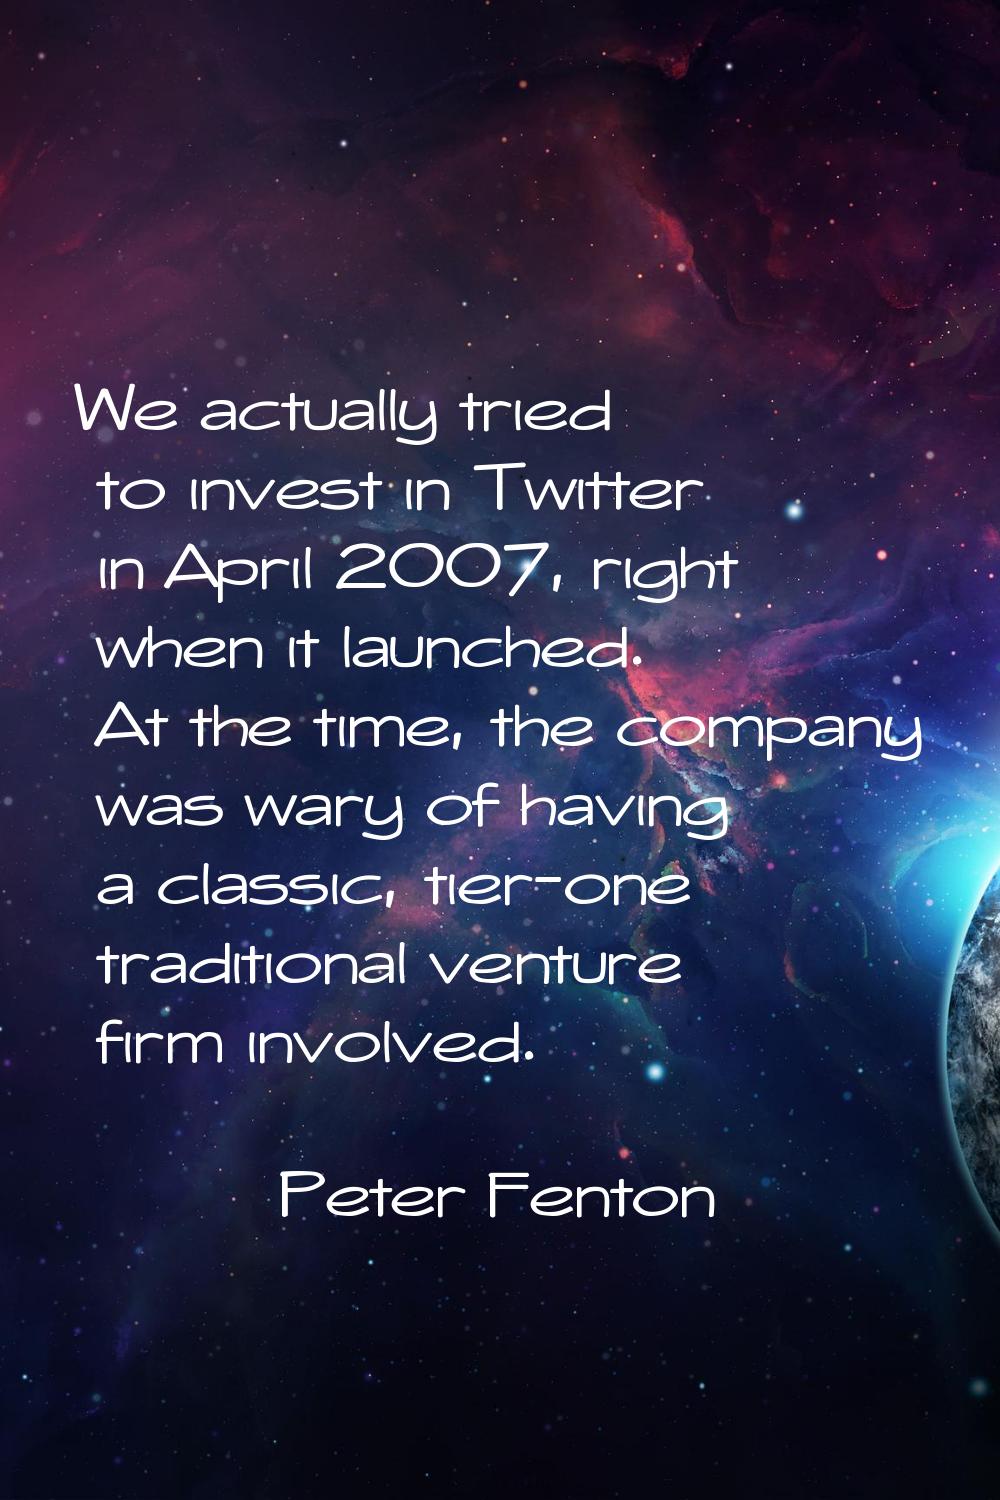 We actually tried to invest in Twitter in April 2007, right when it launched. At the time, the comp